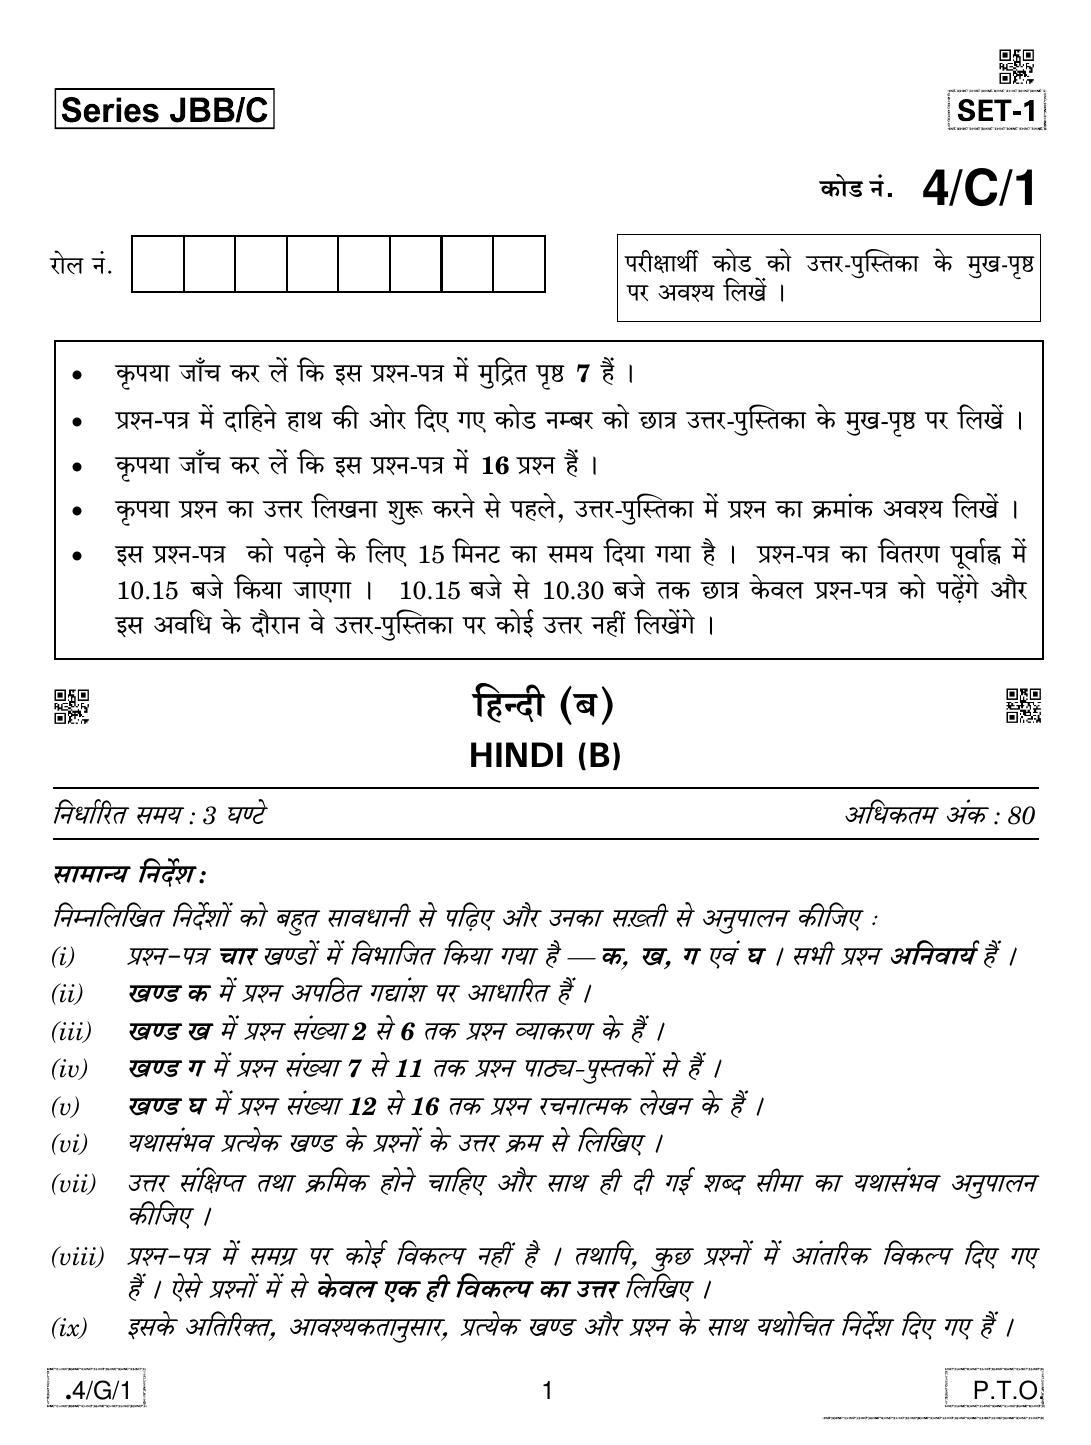 CBSE Class 10 4-C-1 Hindi B 2020 Compartment Question Paper - Page 1